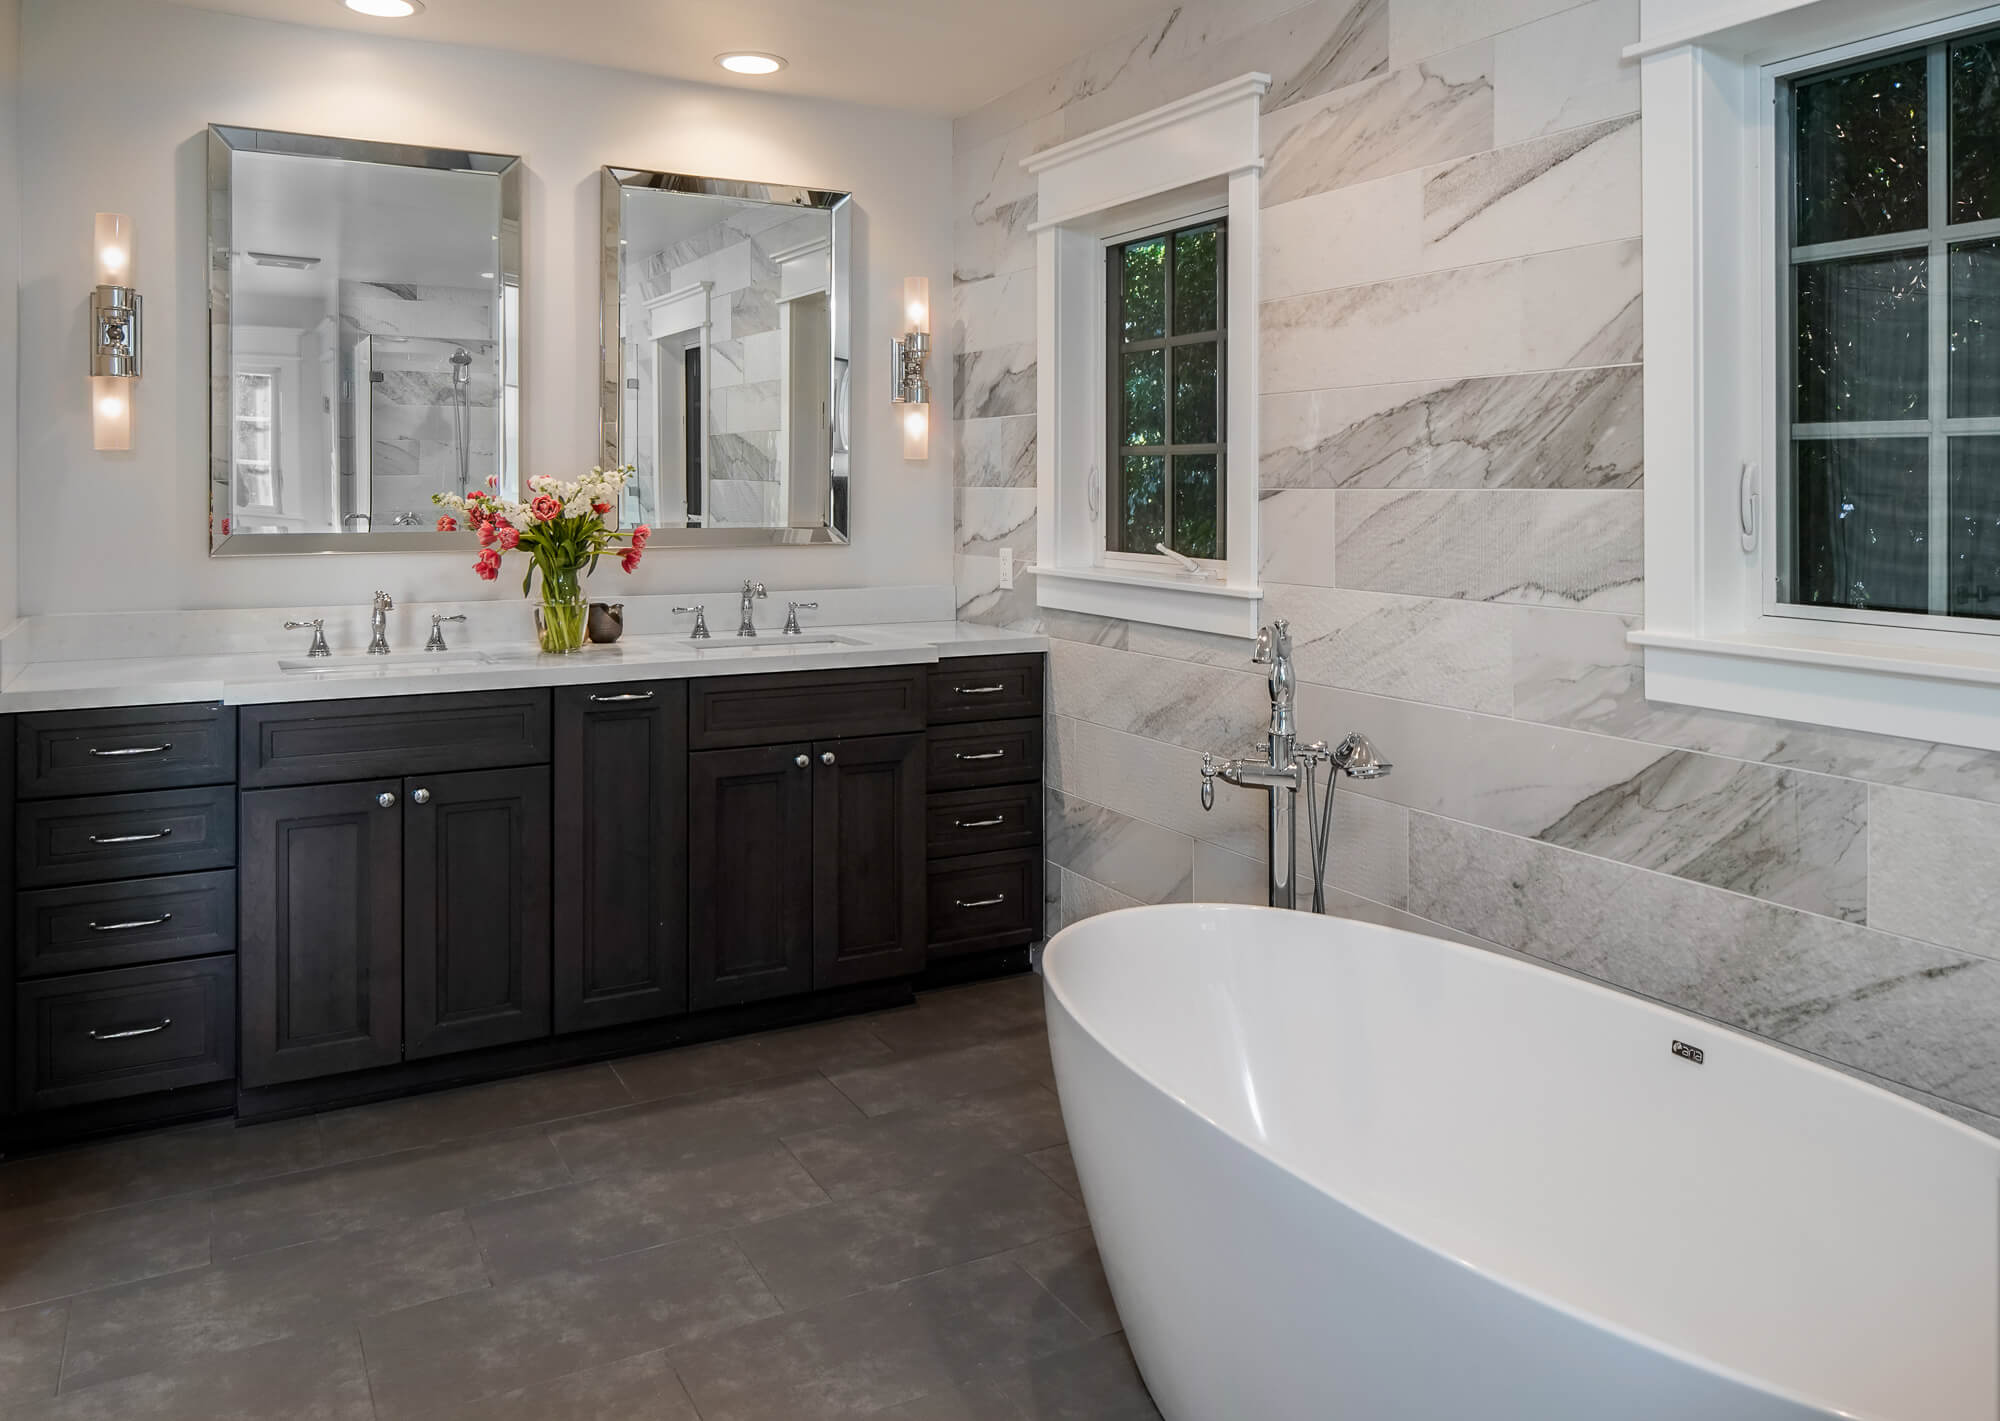 https://www.seapointe.com/wp-content/uploads/2019/01/Sea-Pointe-Master-Bath-Must-Haves-Main-002.jpg